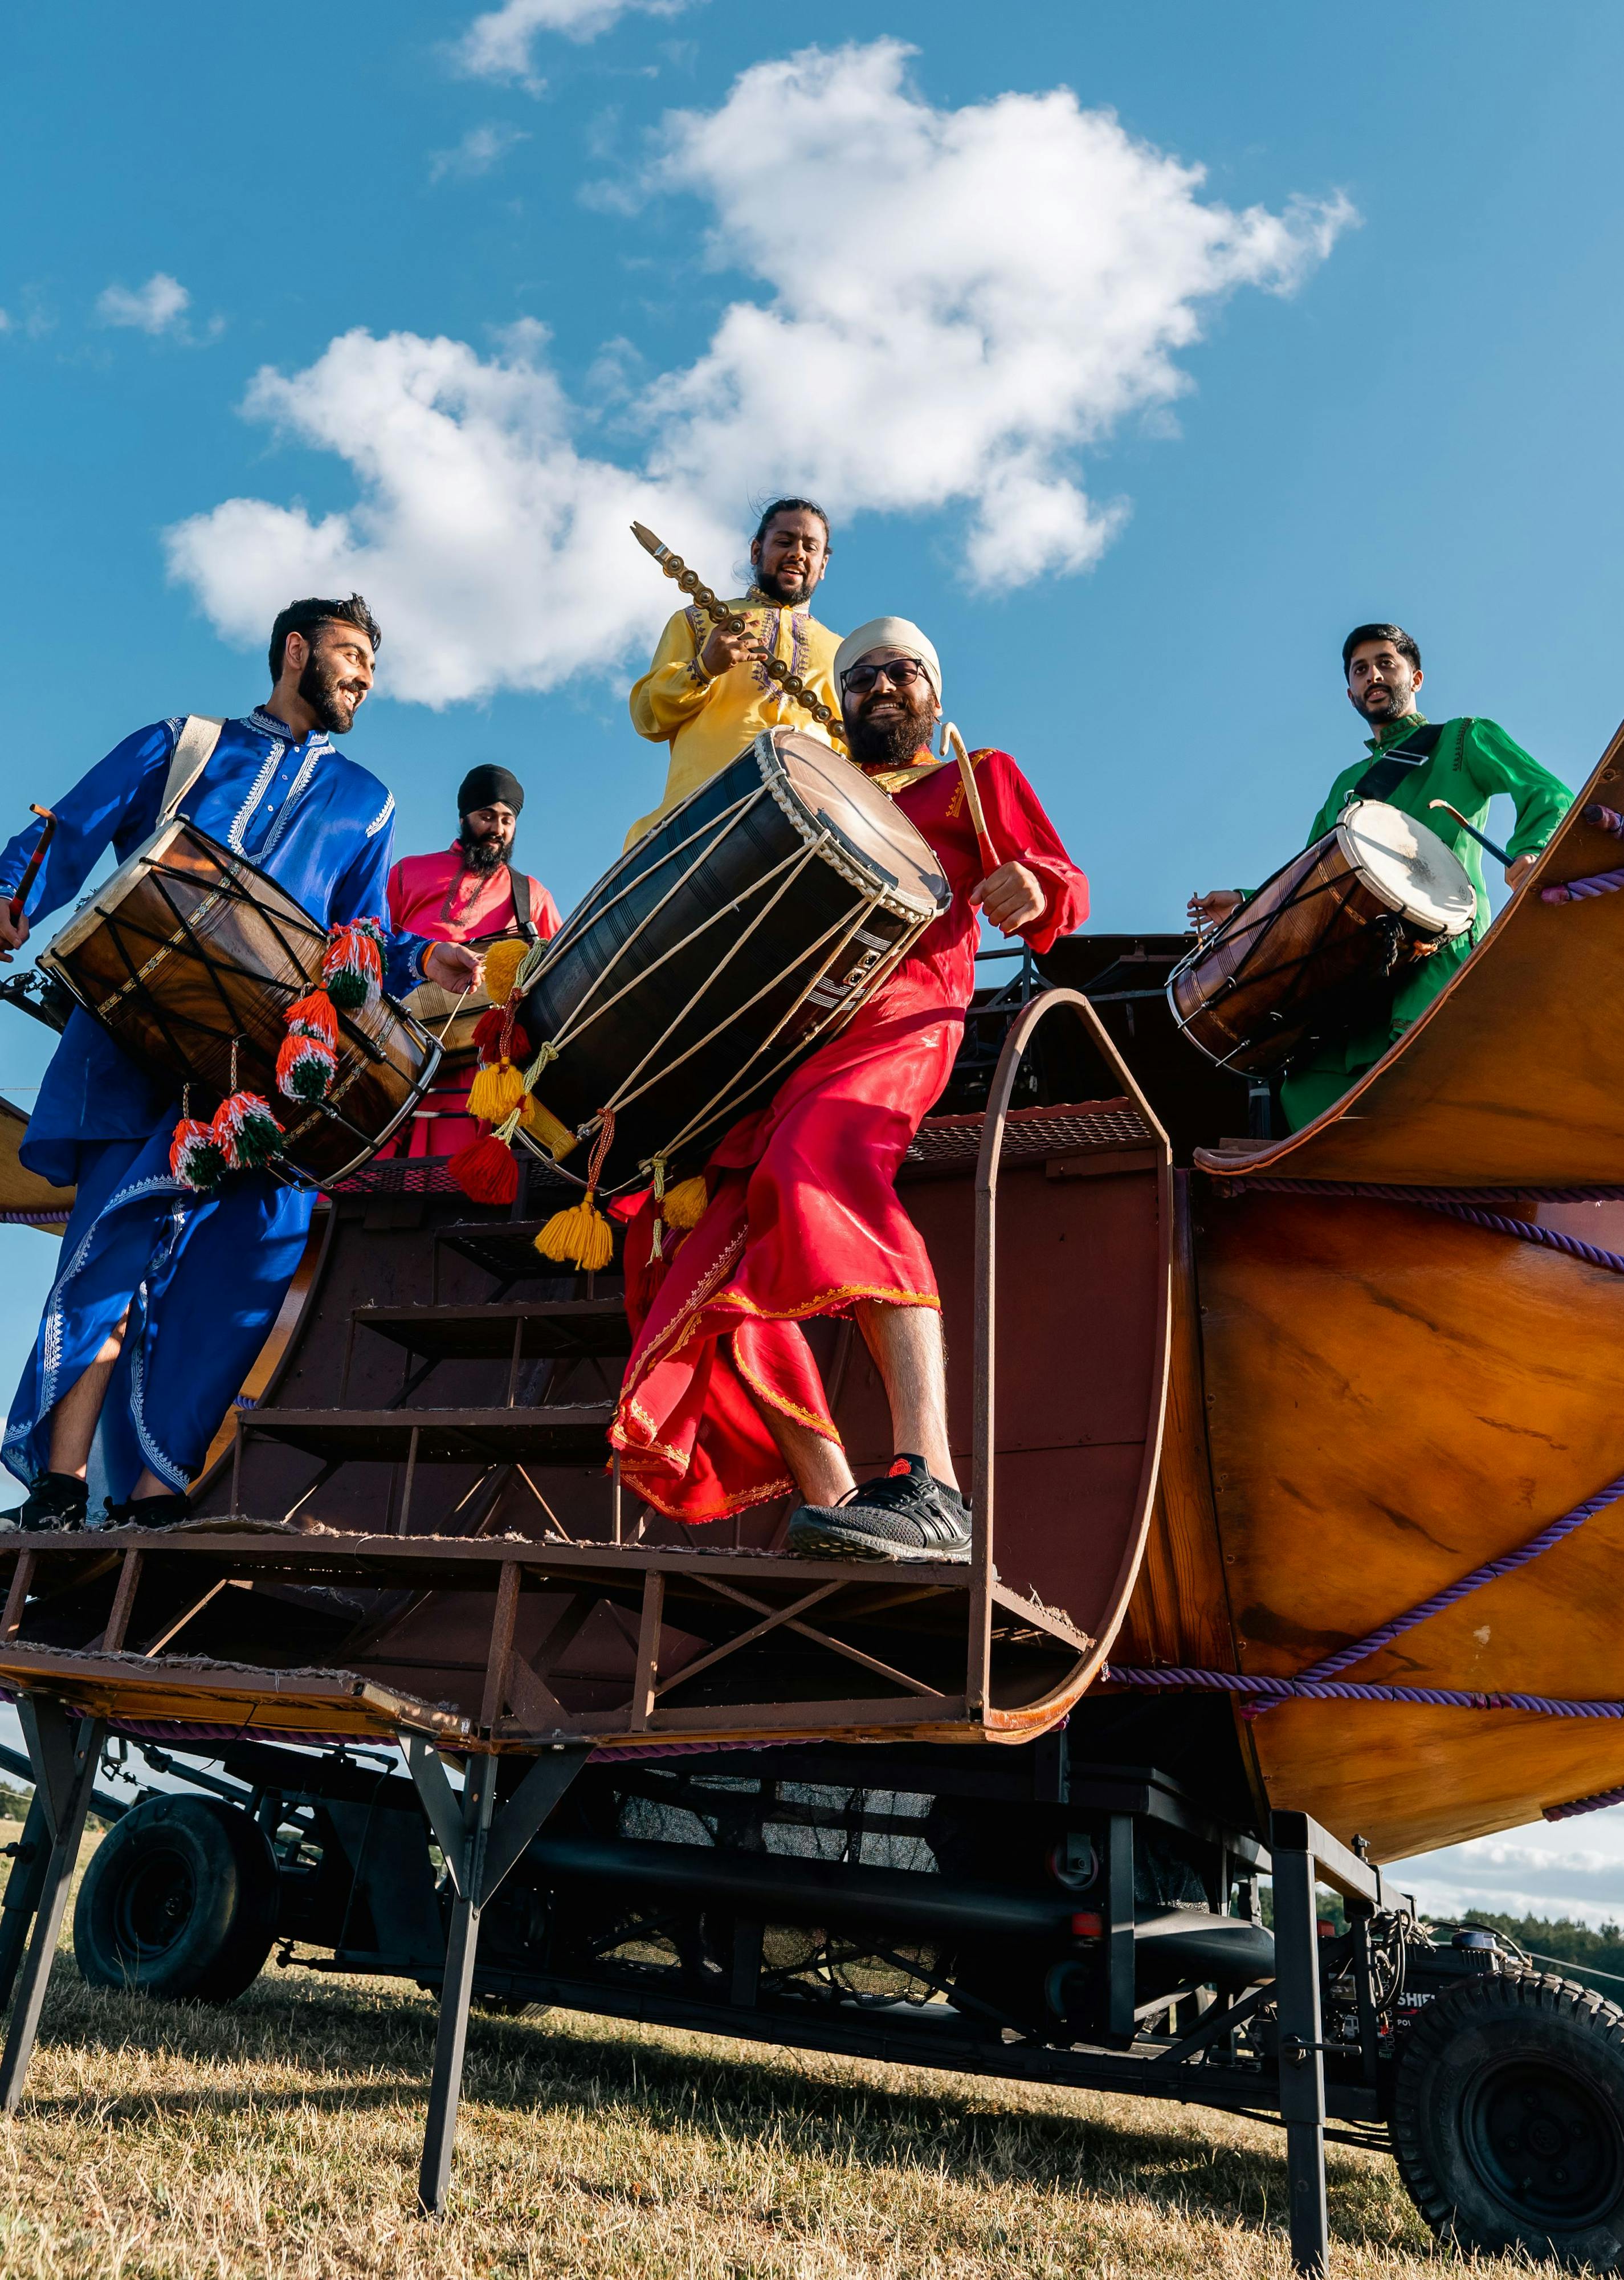 Six drummers in brightly coloured clothing standing inside a giant Dhol Drum